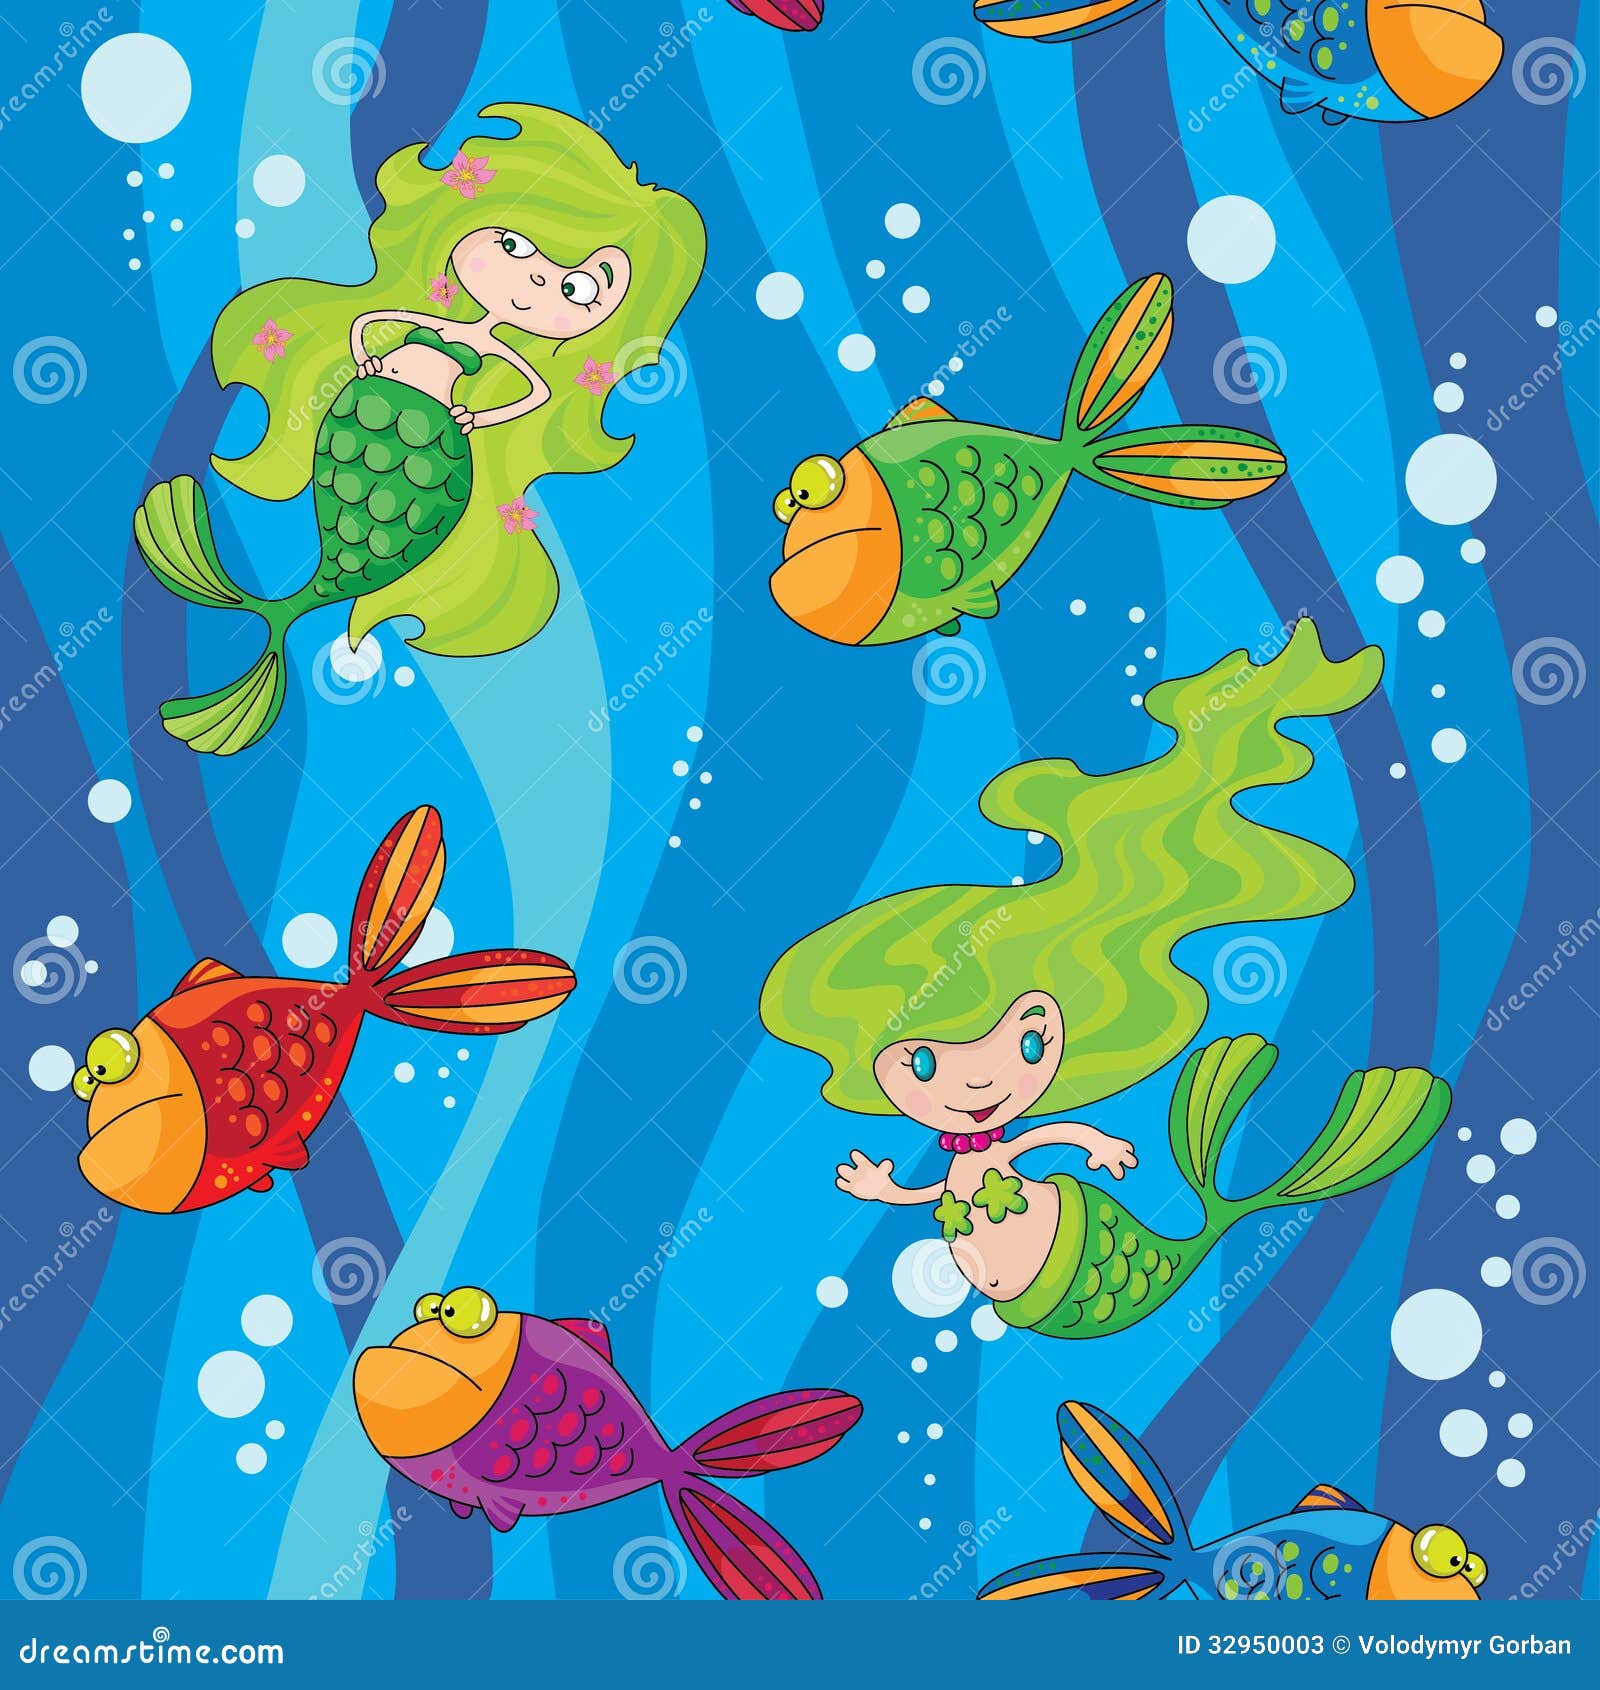 Seamless Mermaids Fish In Water With Waves Stock Vector Illustration